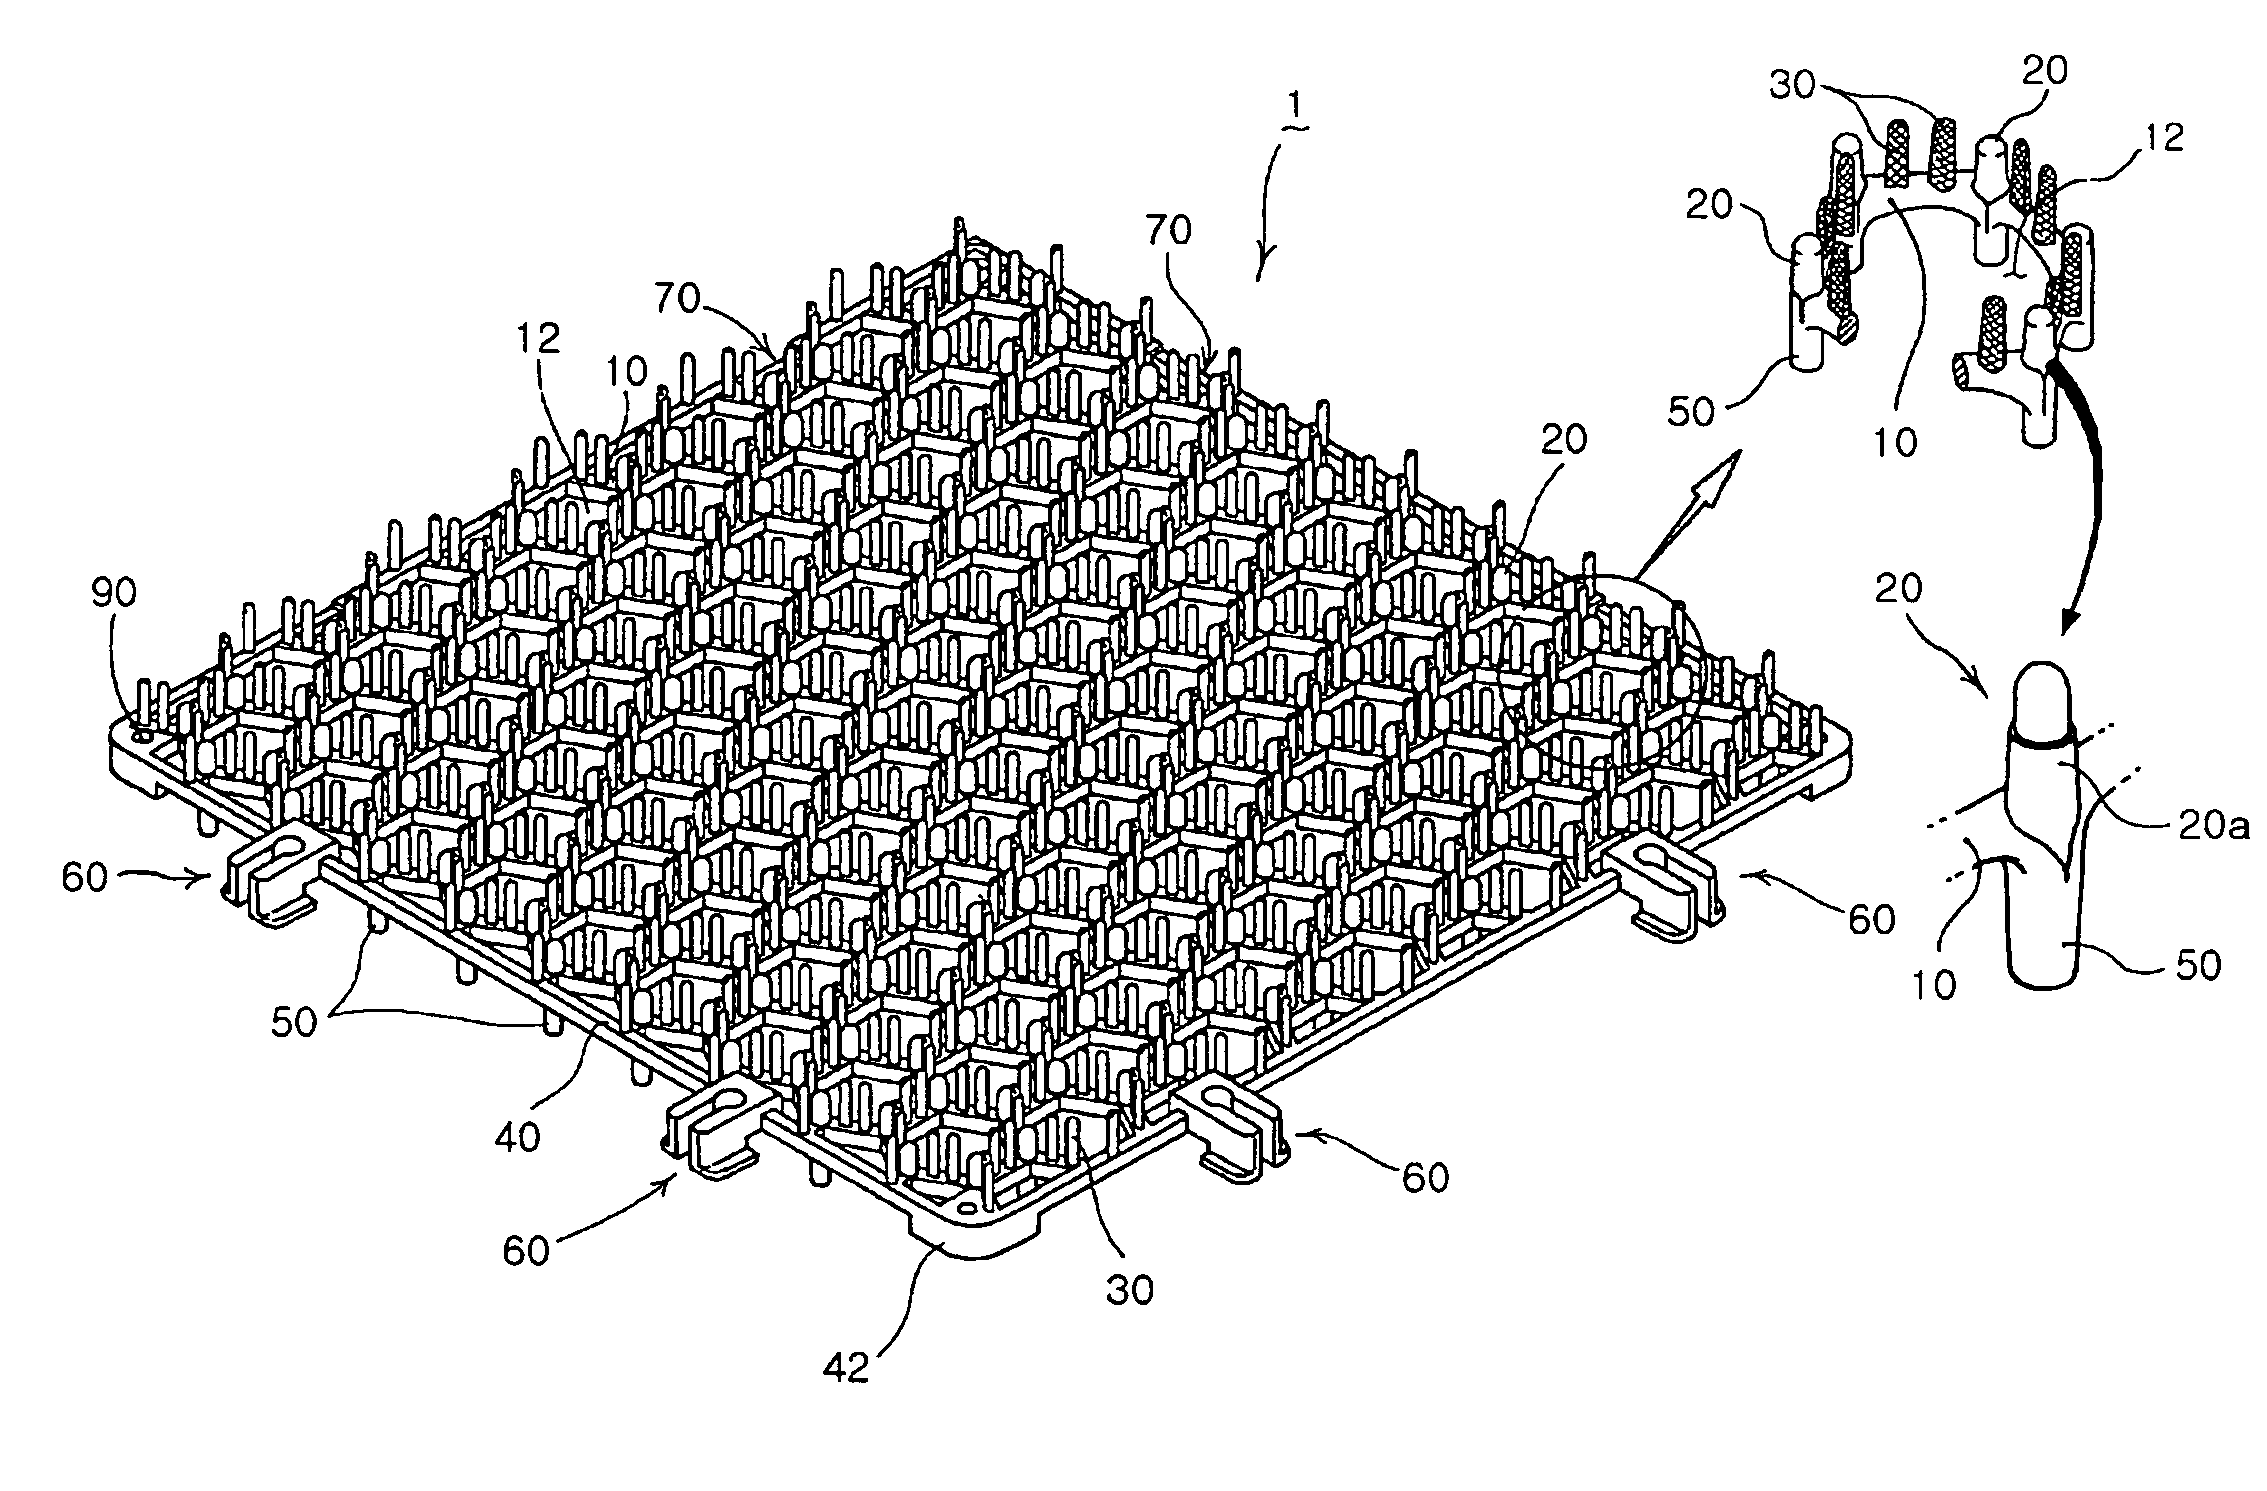 Grass protection mat and mat assembly having the same